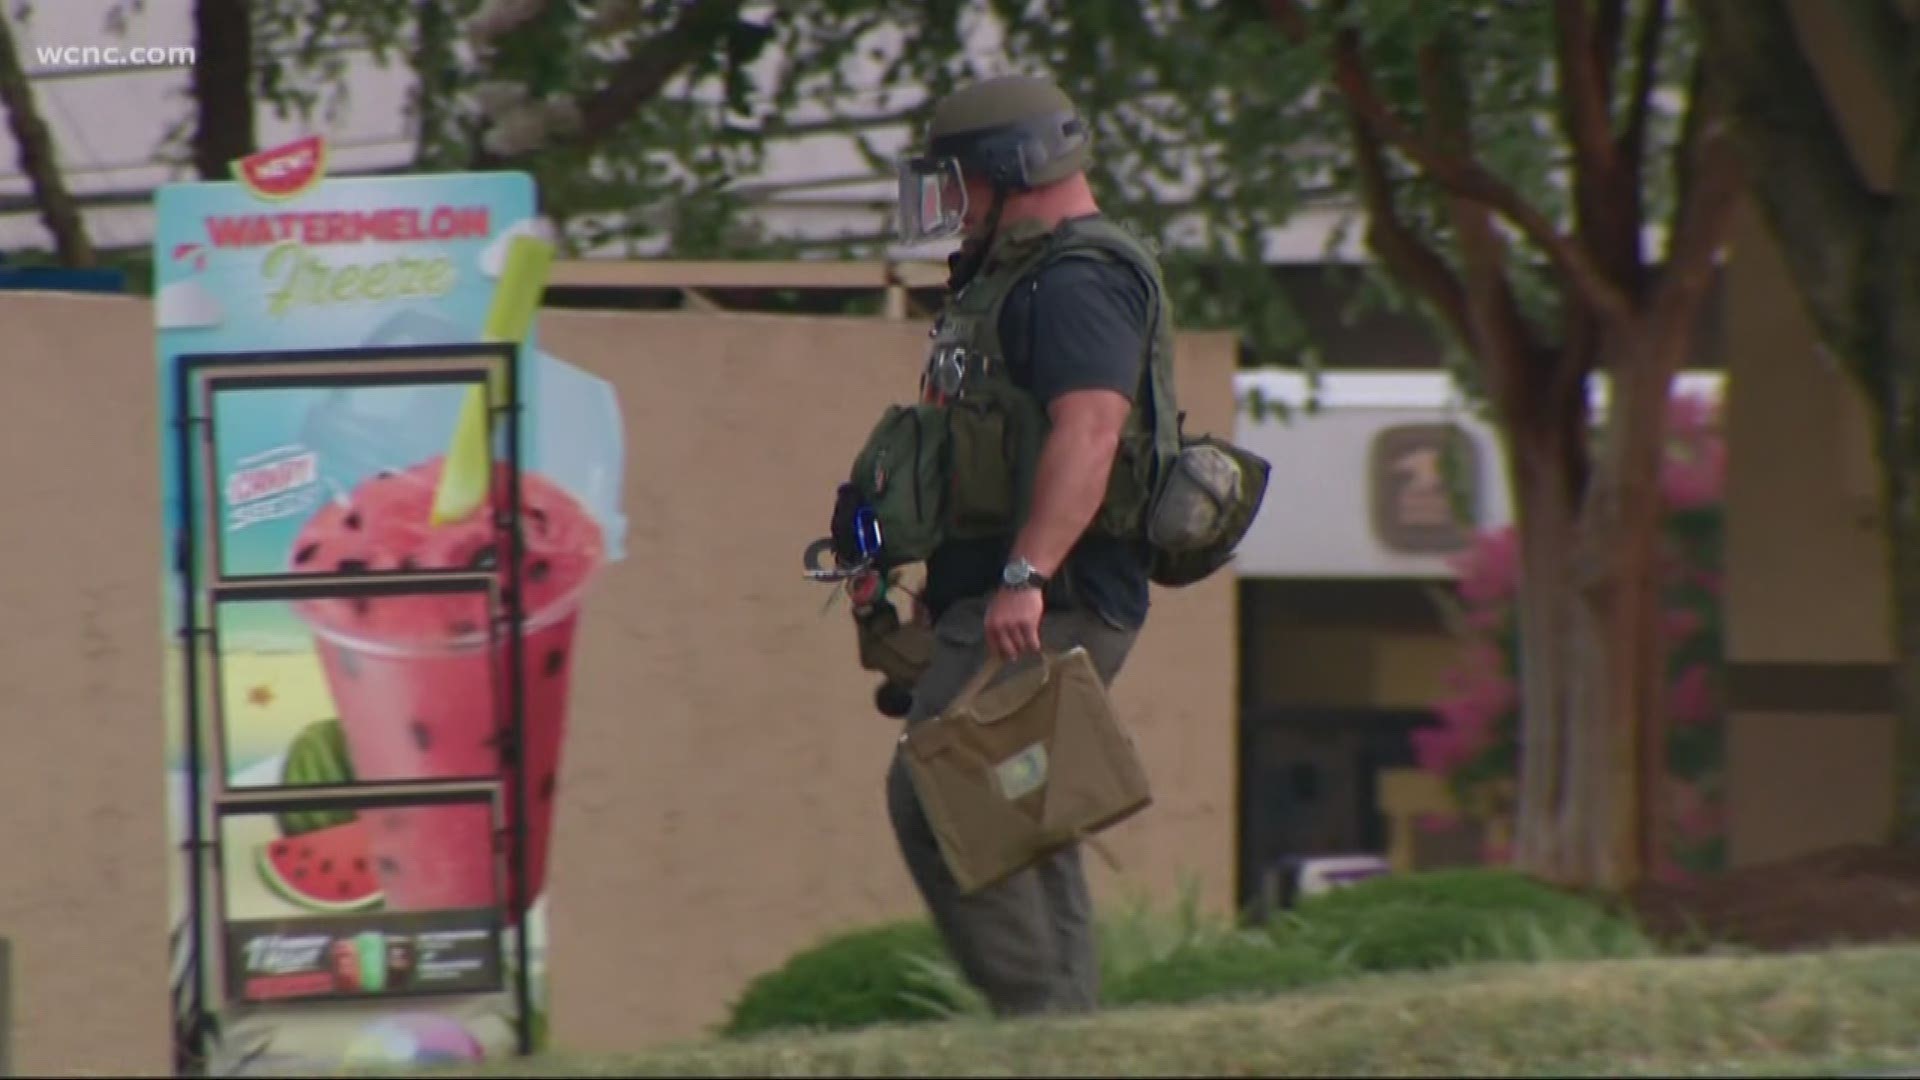 Police later deemed the package safe after investigating it for over two hours.